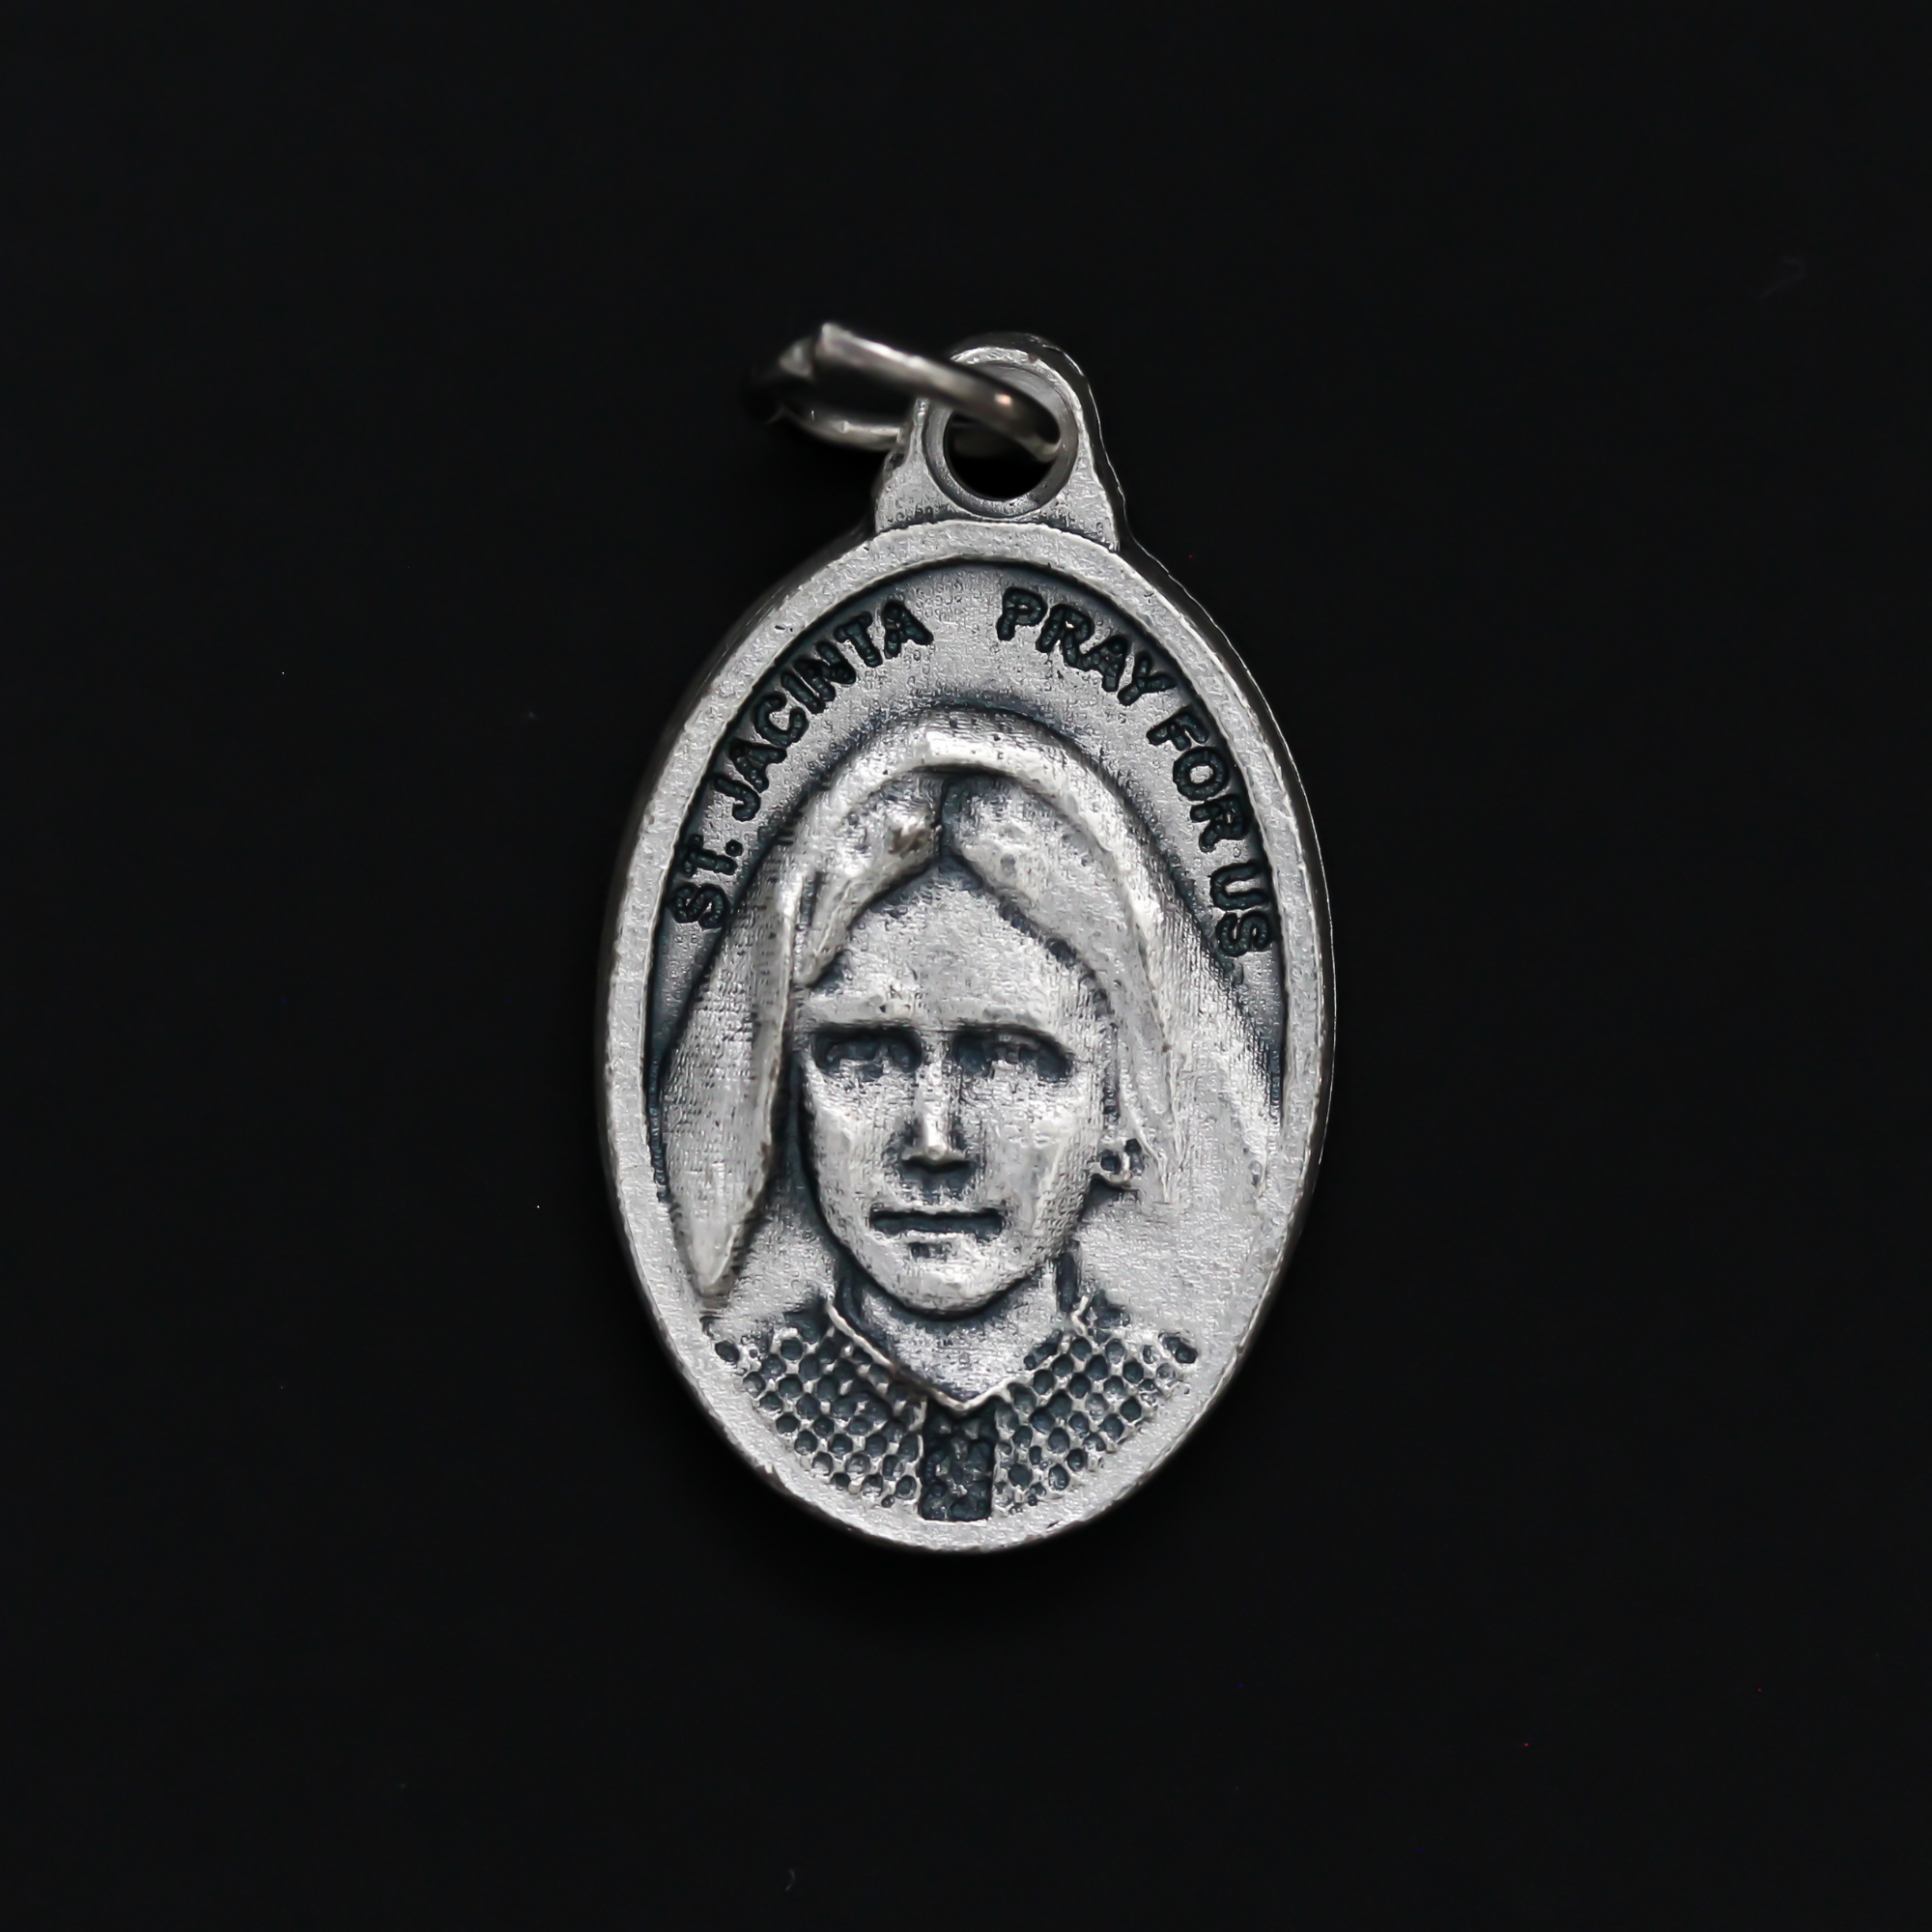 Saints Jacinta and Francisco Marto medal that depicts each saint on one side. Made in Italy.